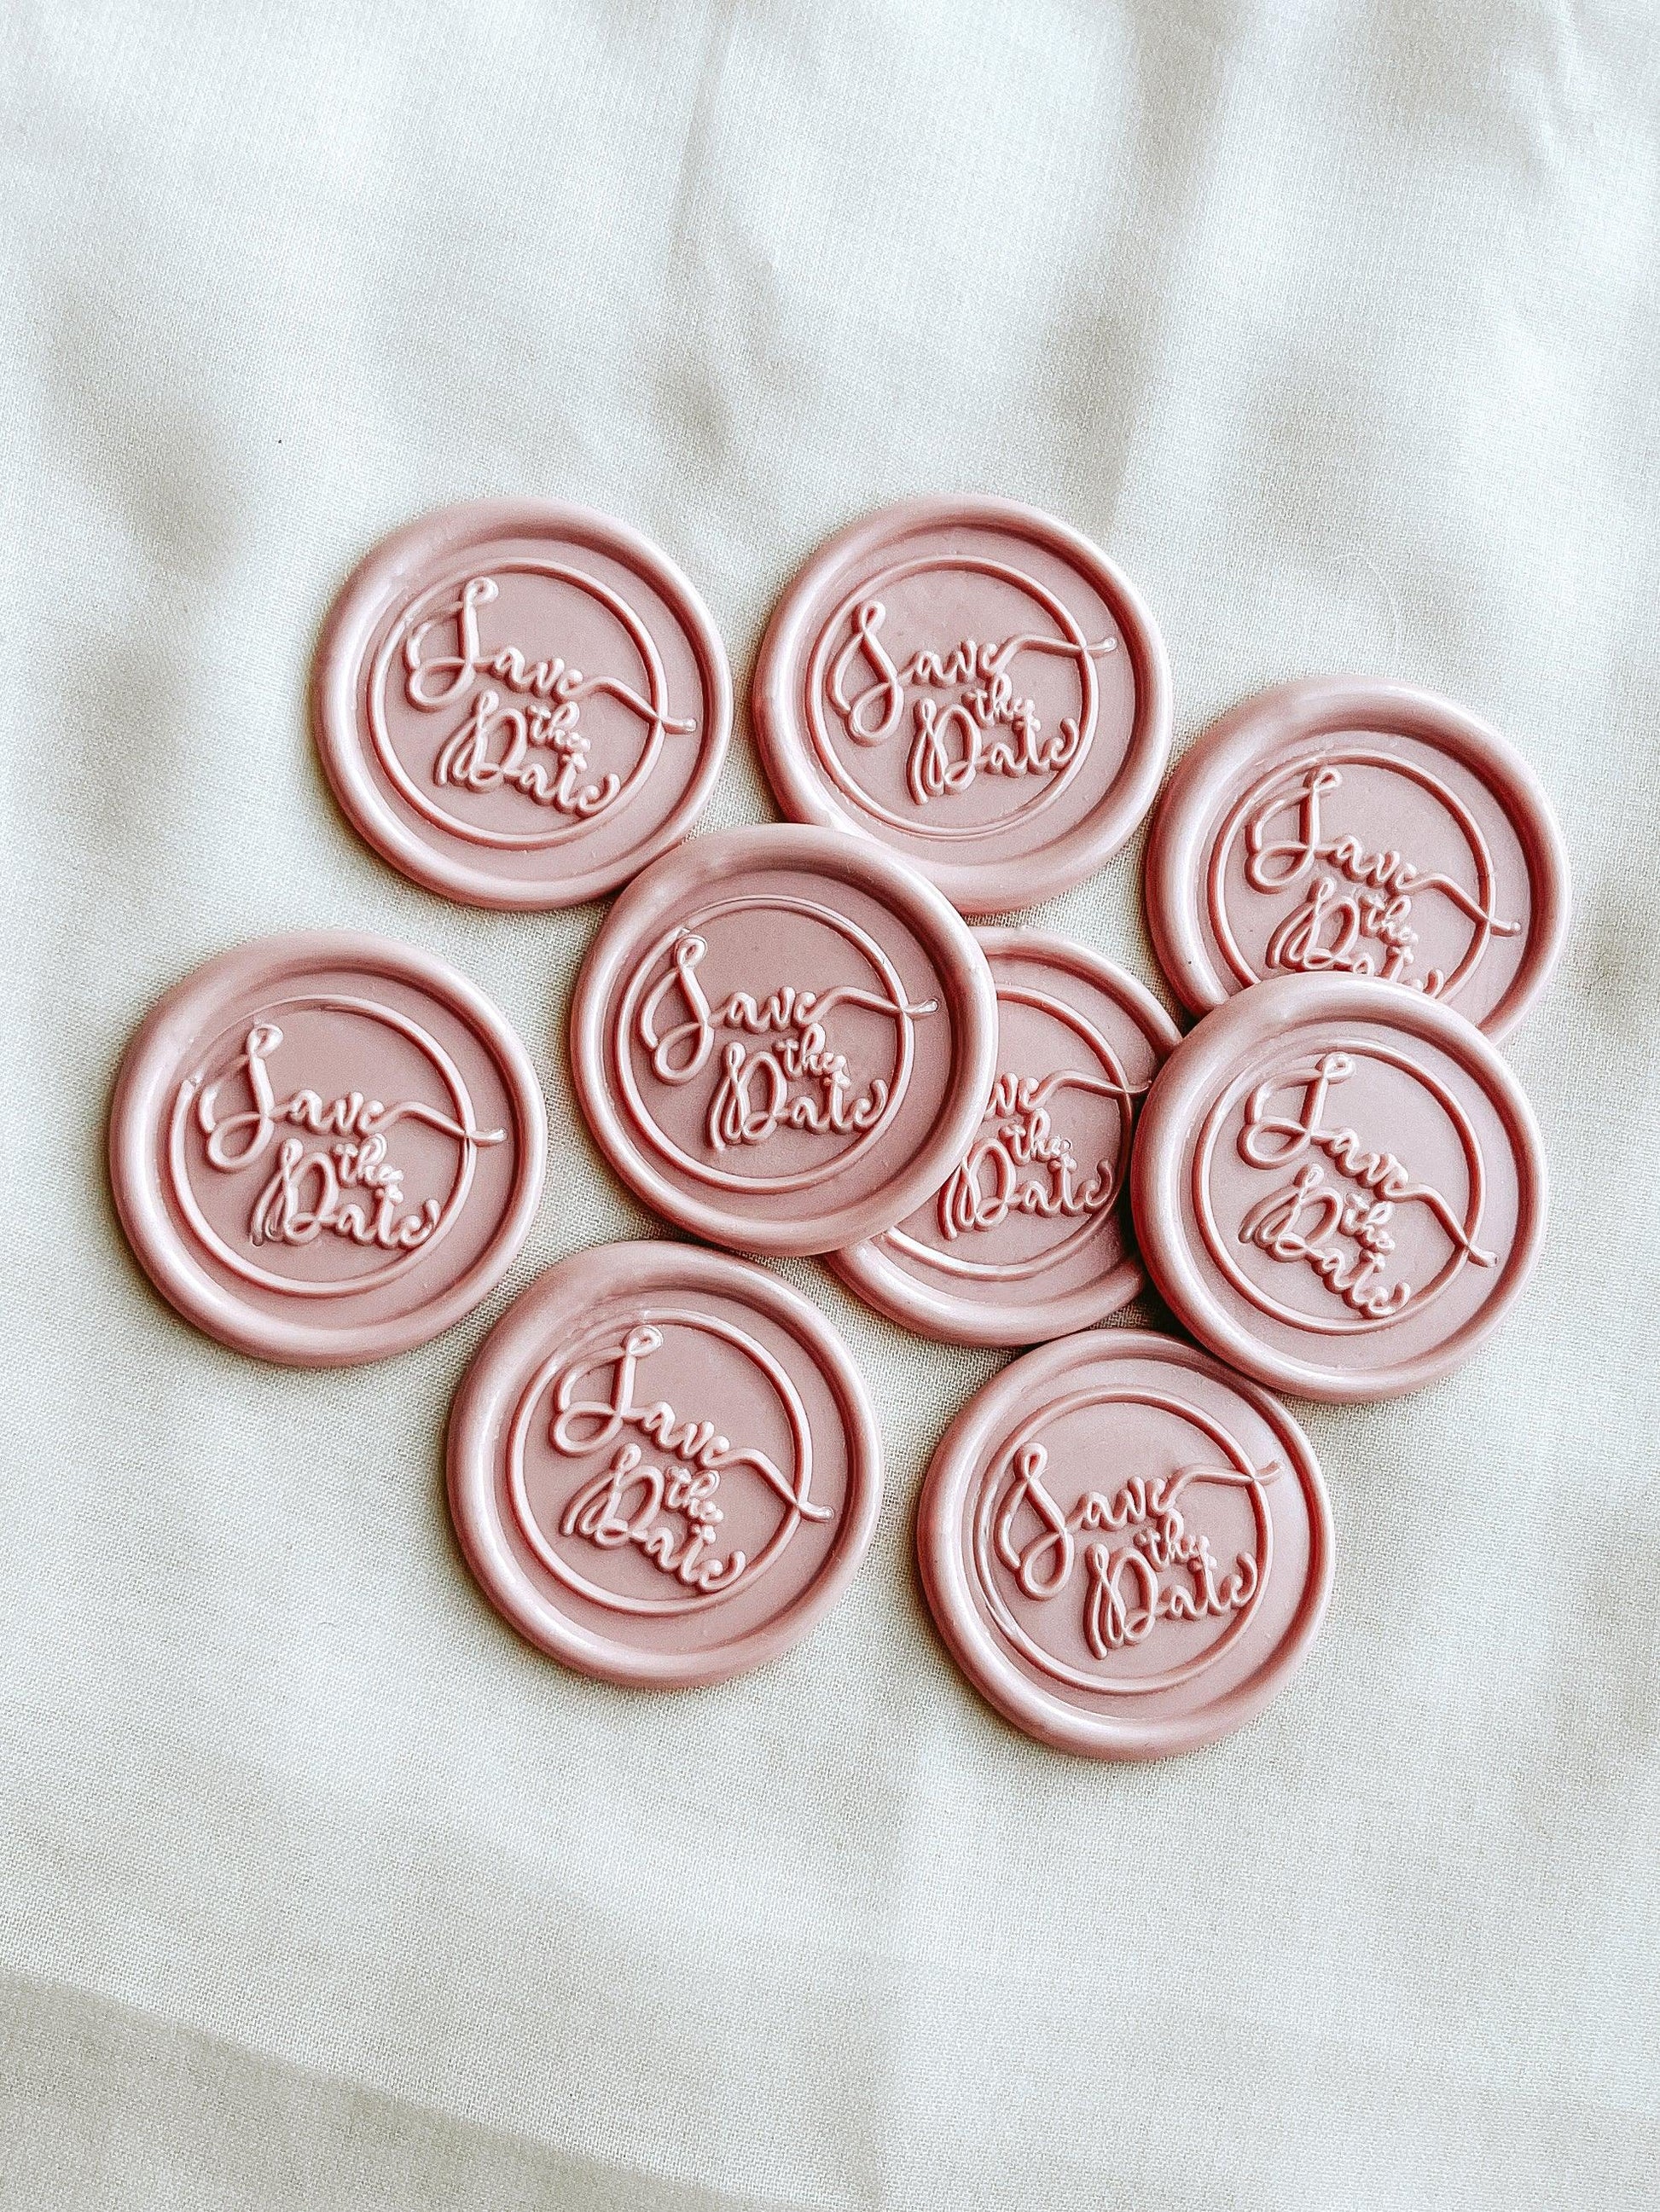 Save The Date wax seals - Set of 9 - Made of Honour Co.